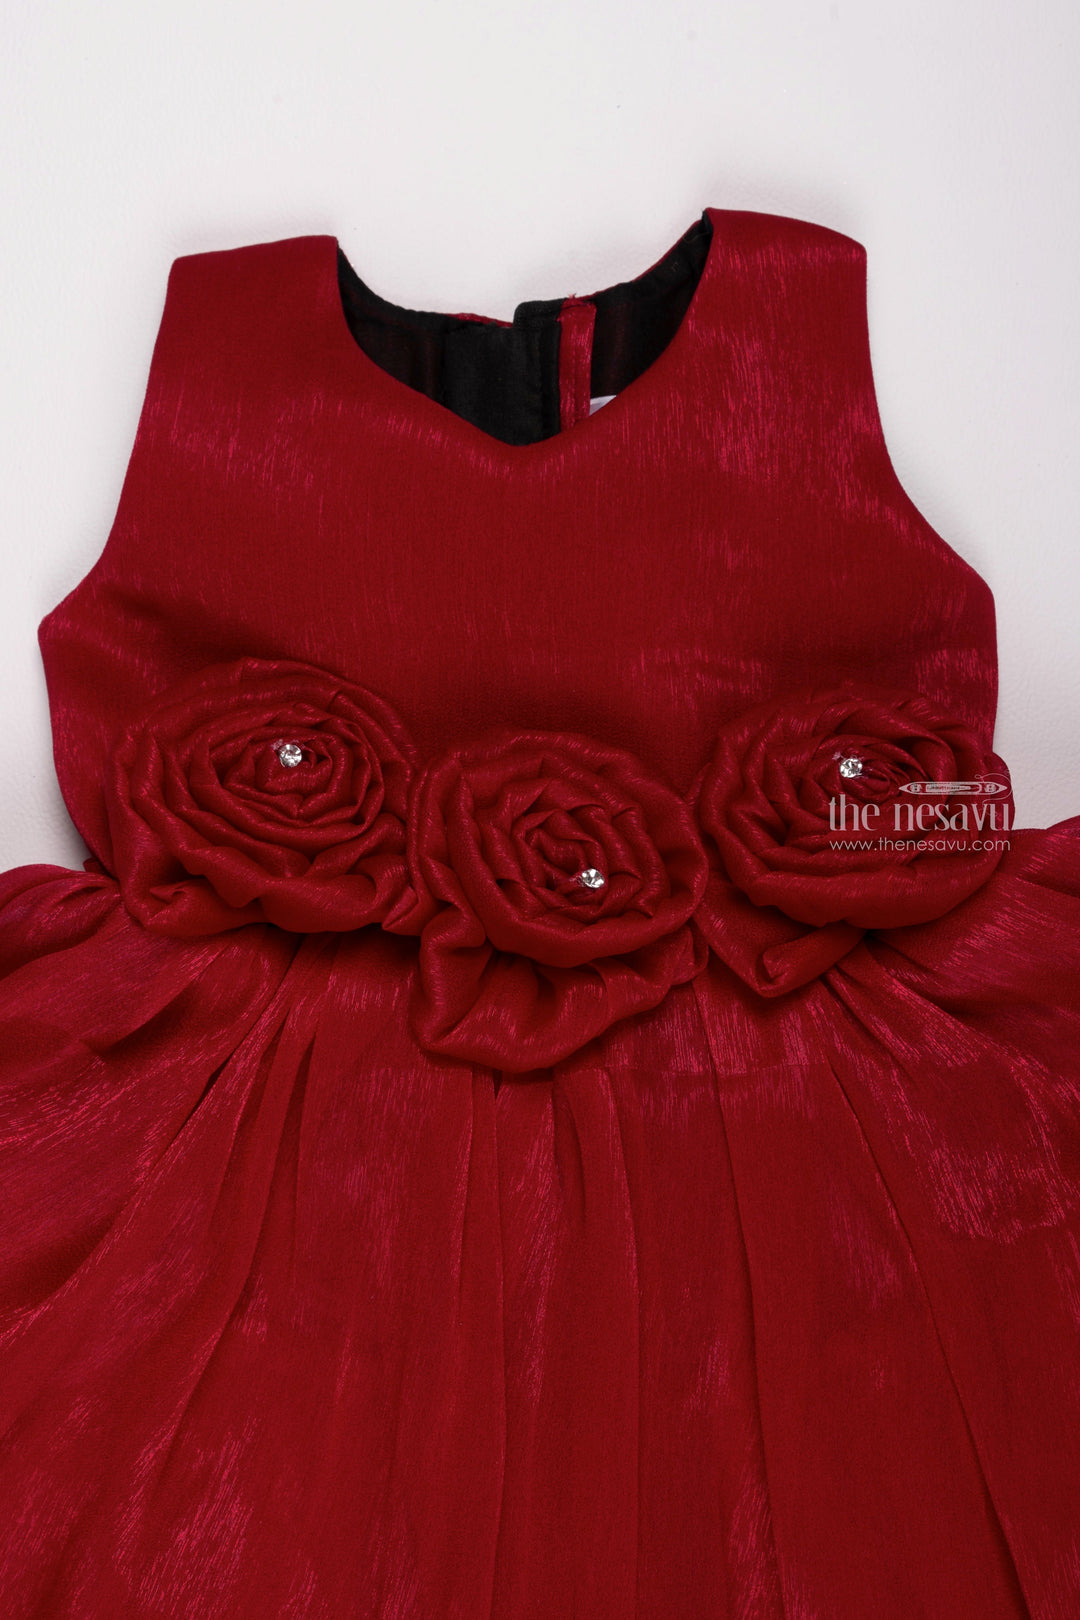 The Nesavu Girls Fancy Party Frock Deep Rose Romance: Cute Fabric Flower Applique on Pleated Organza Party Frock Nesavu Adorable & Stylish: Baby Girl Party Dress Collections | The Nesavu